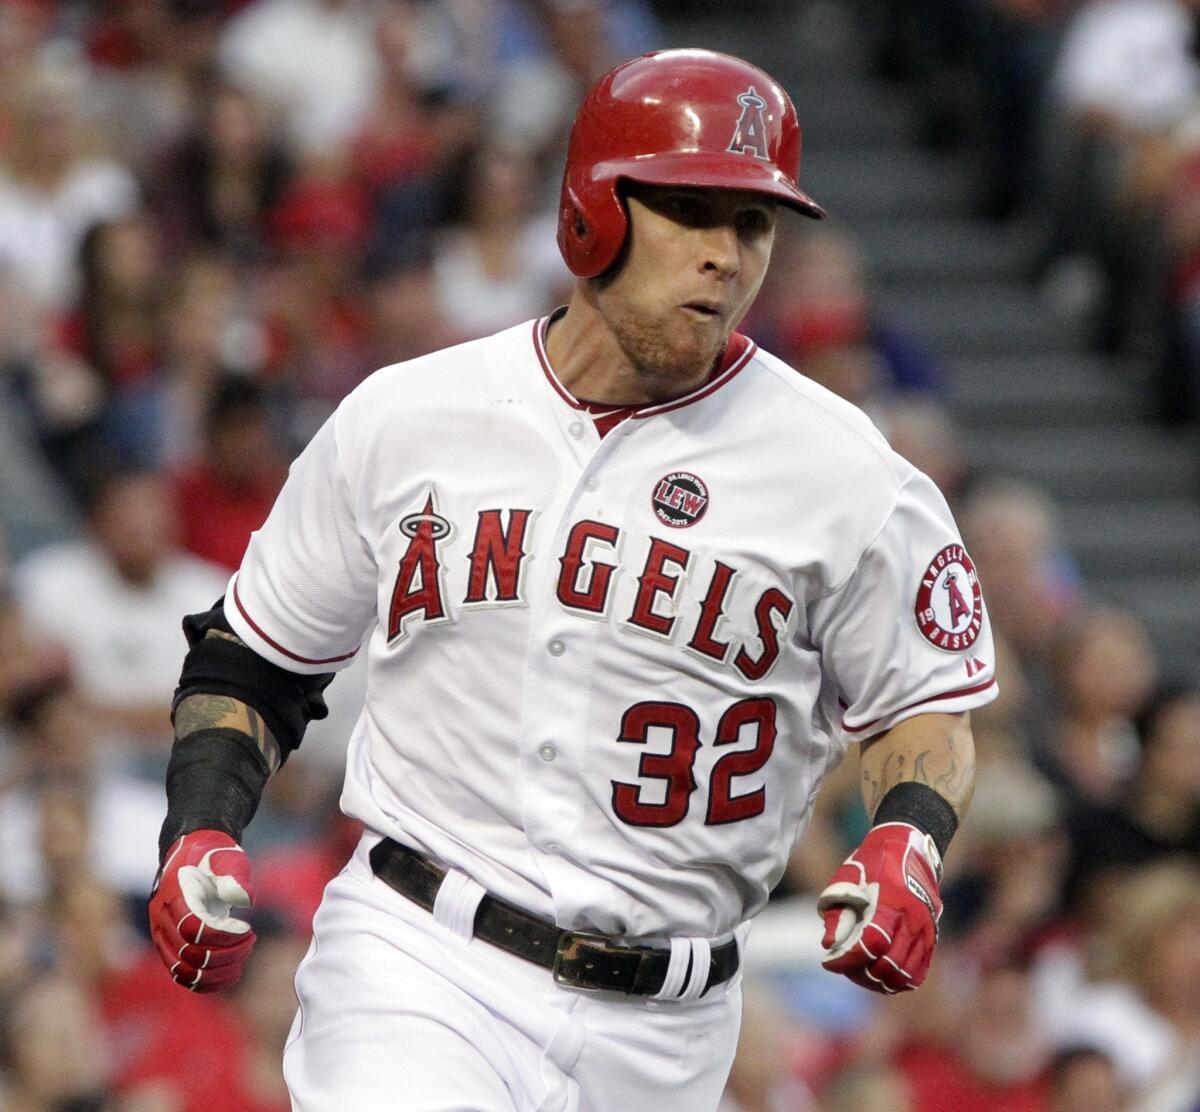 Angels outfielder Josh Hamilton isn't sure what triggered his ankle injury.